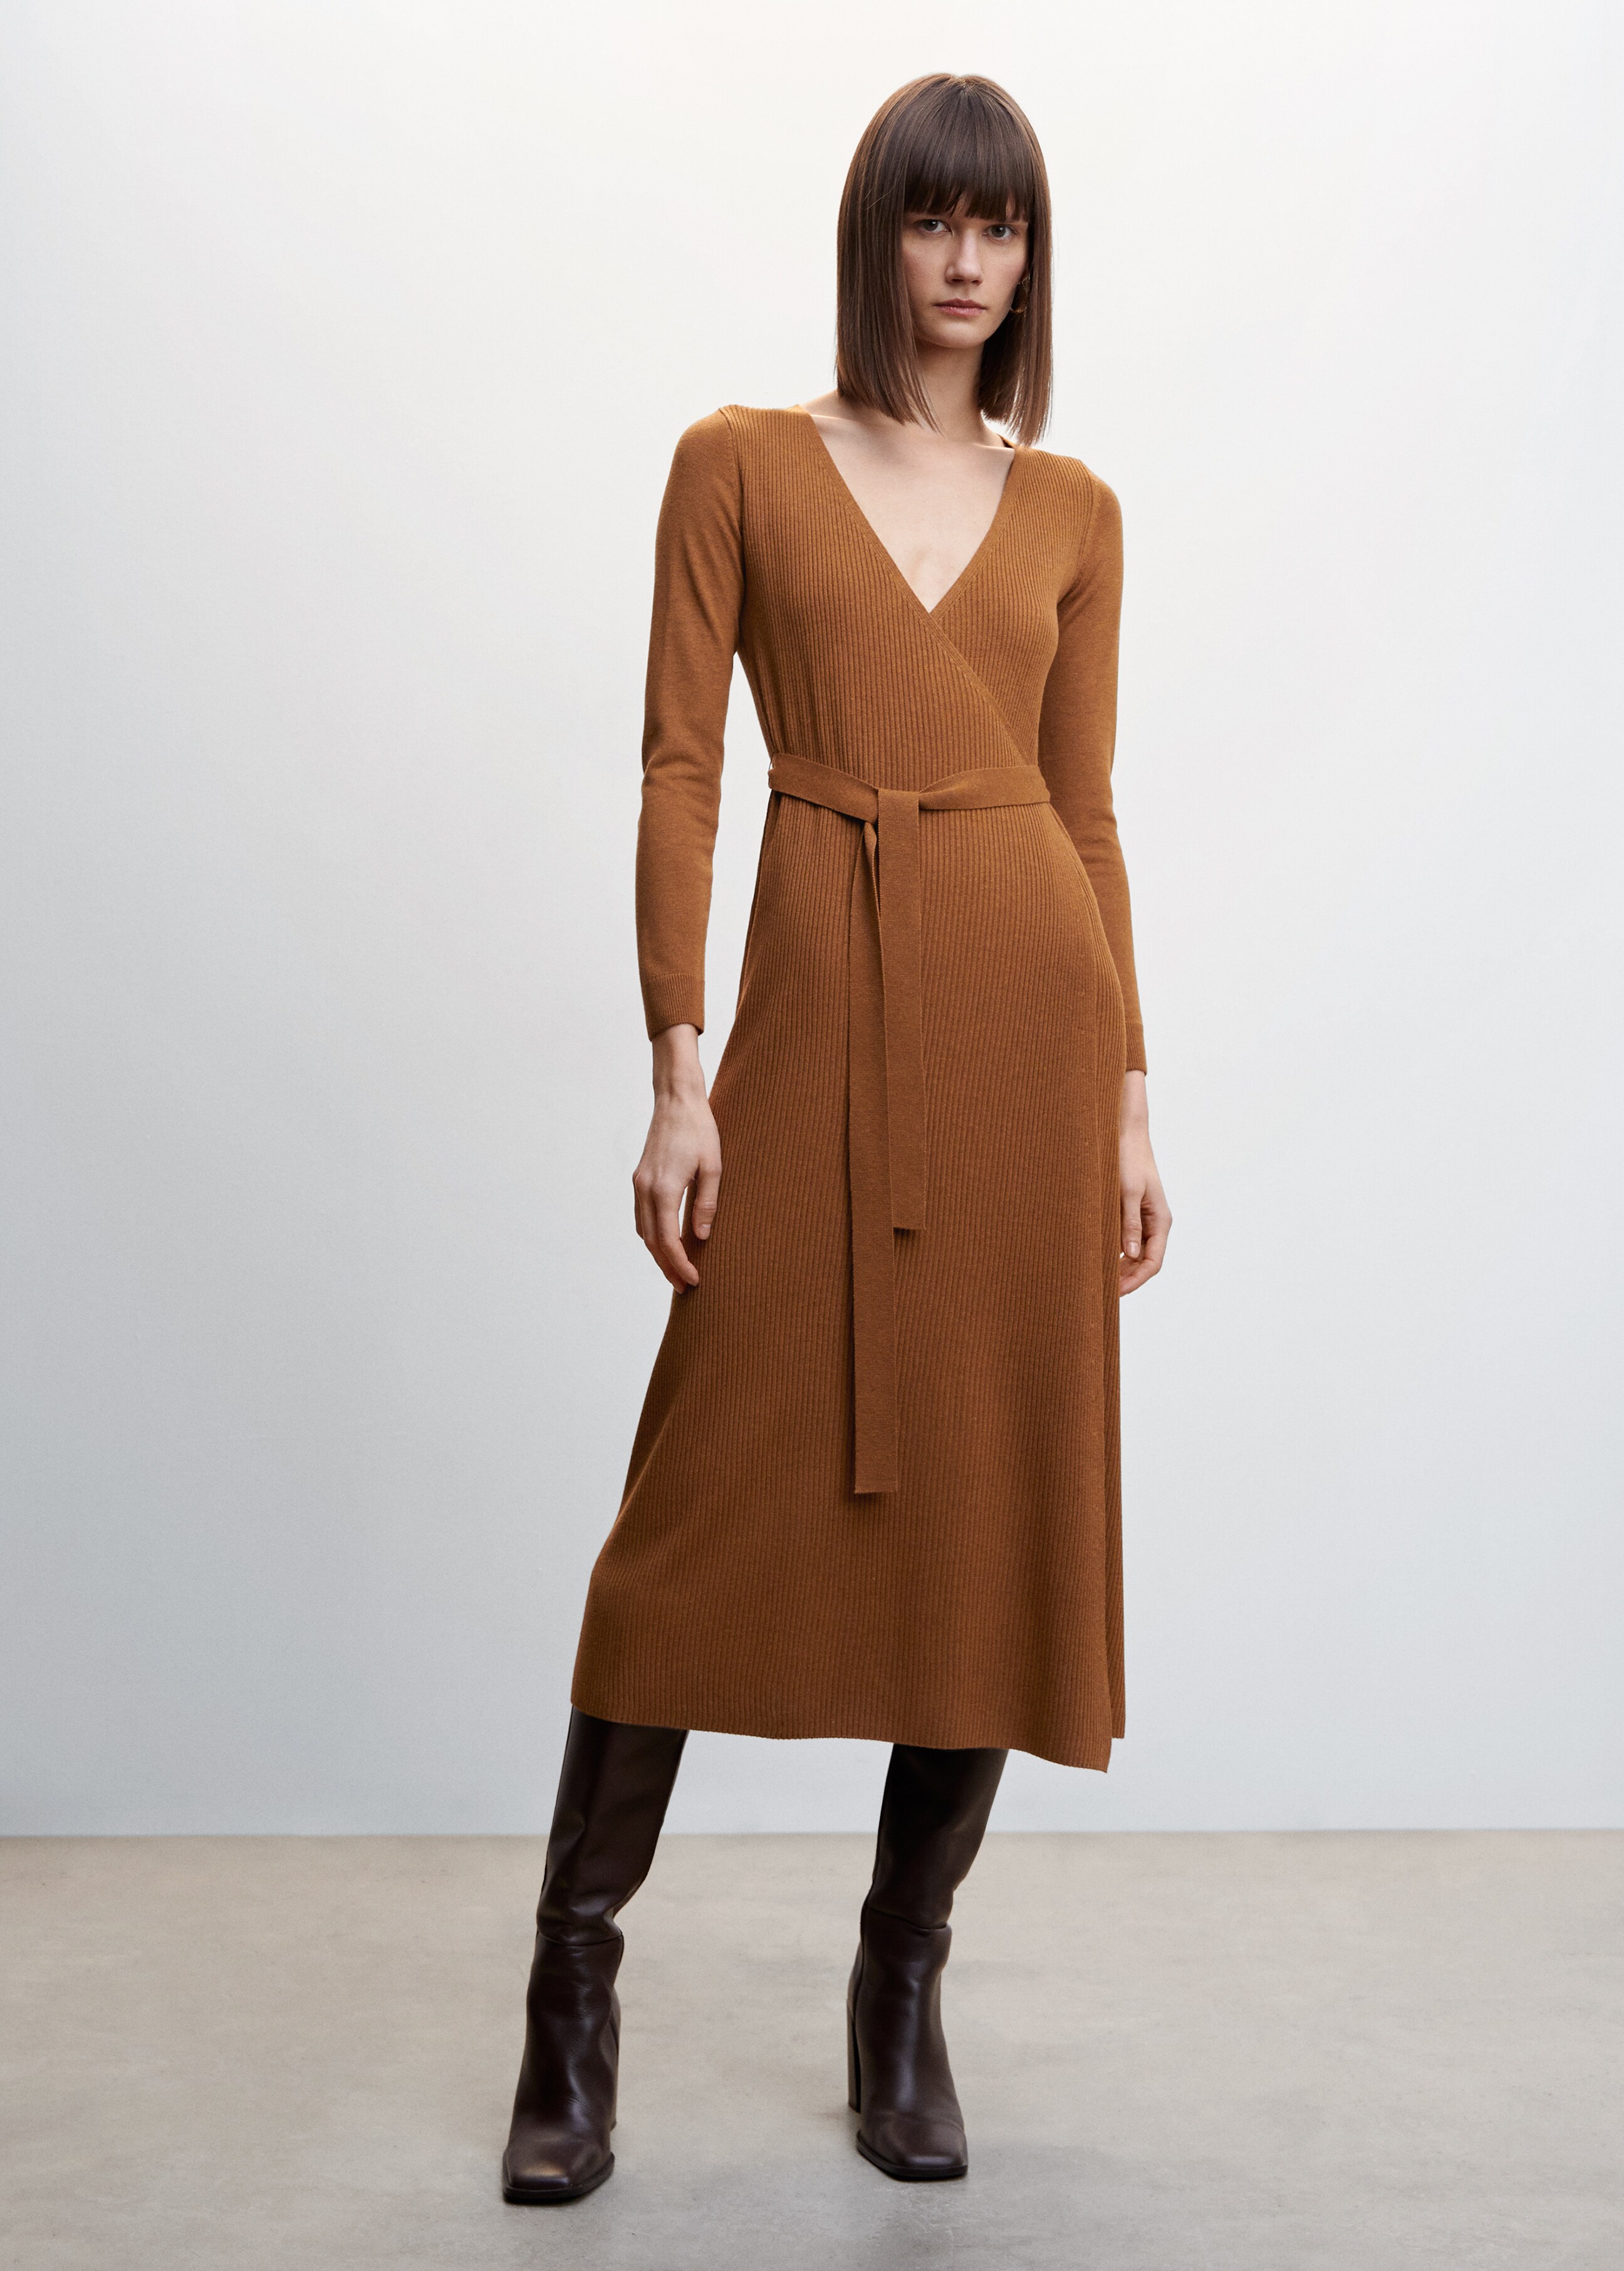 Bow knitted dress - General plane